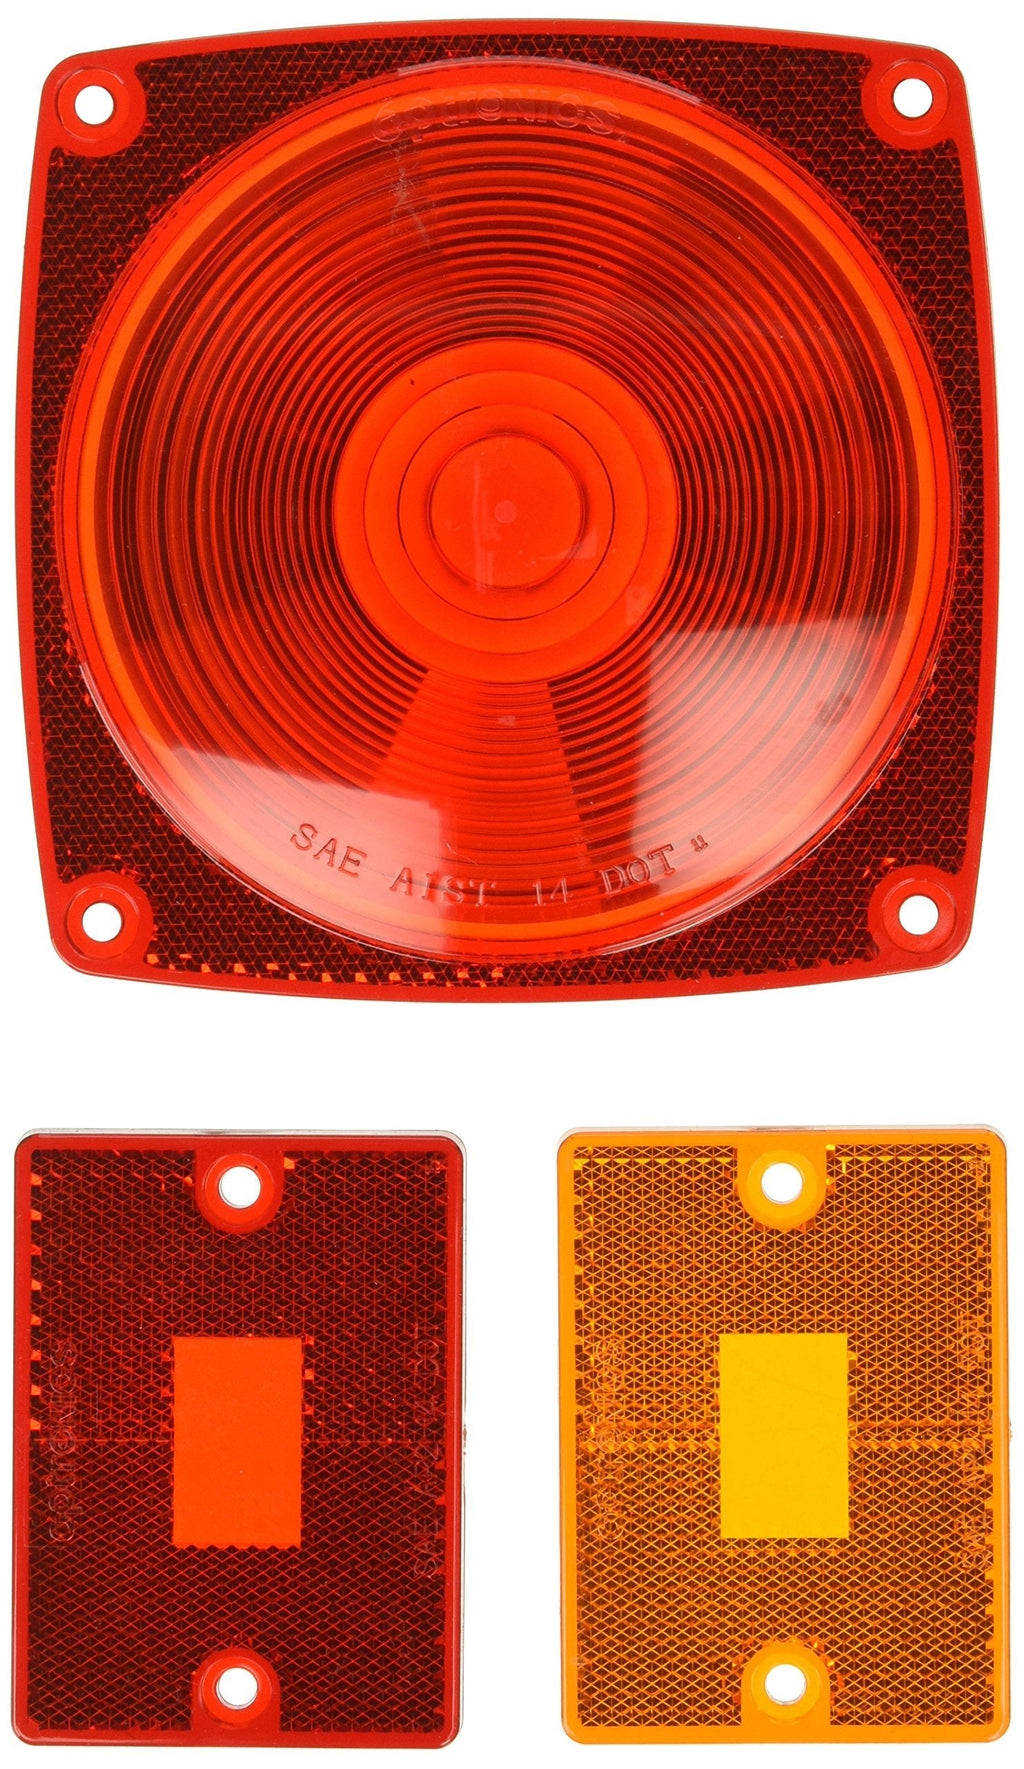  [AUSTRALIA] - Optronics A8RK Tail and Side Marker Light Replacement Lens Set, Red